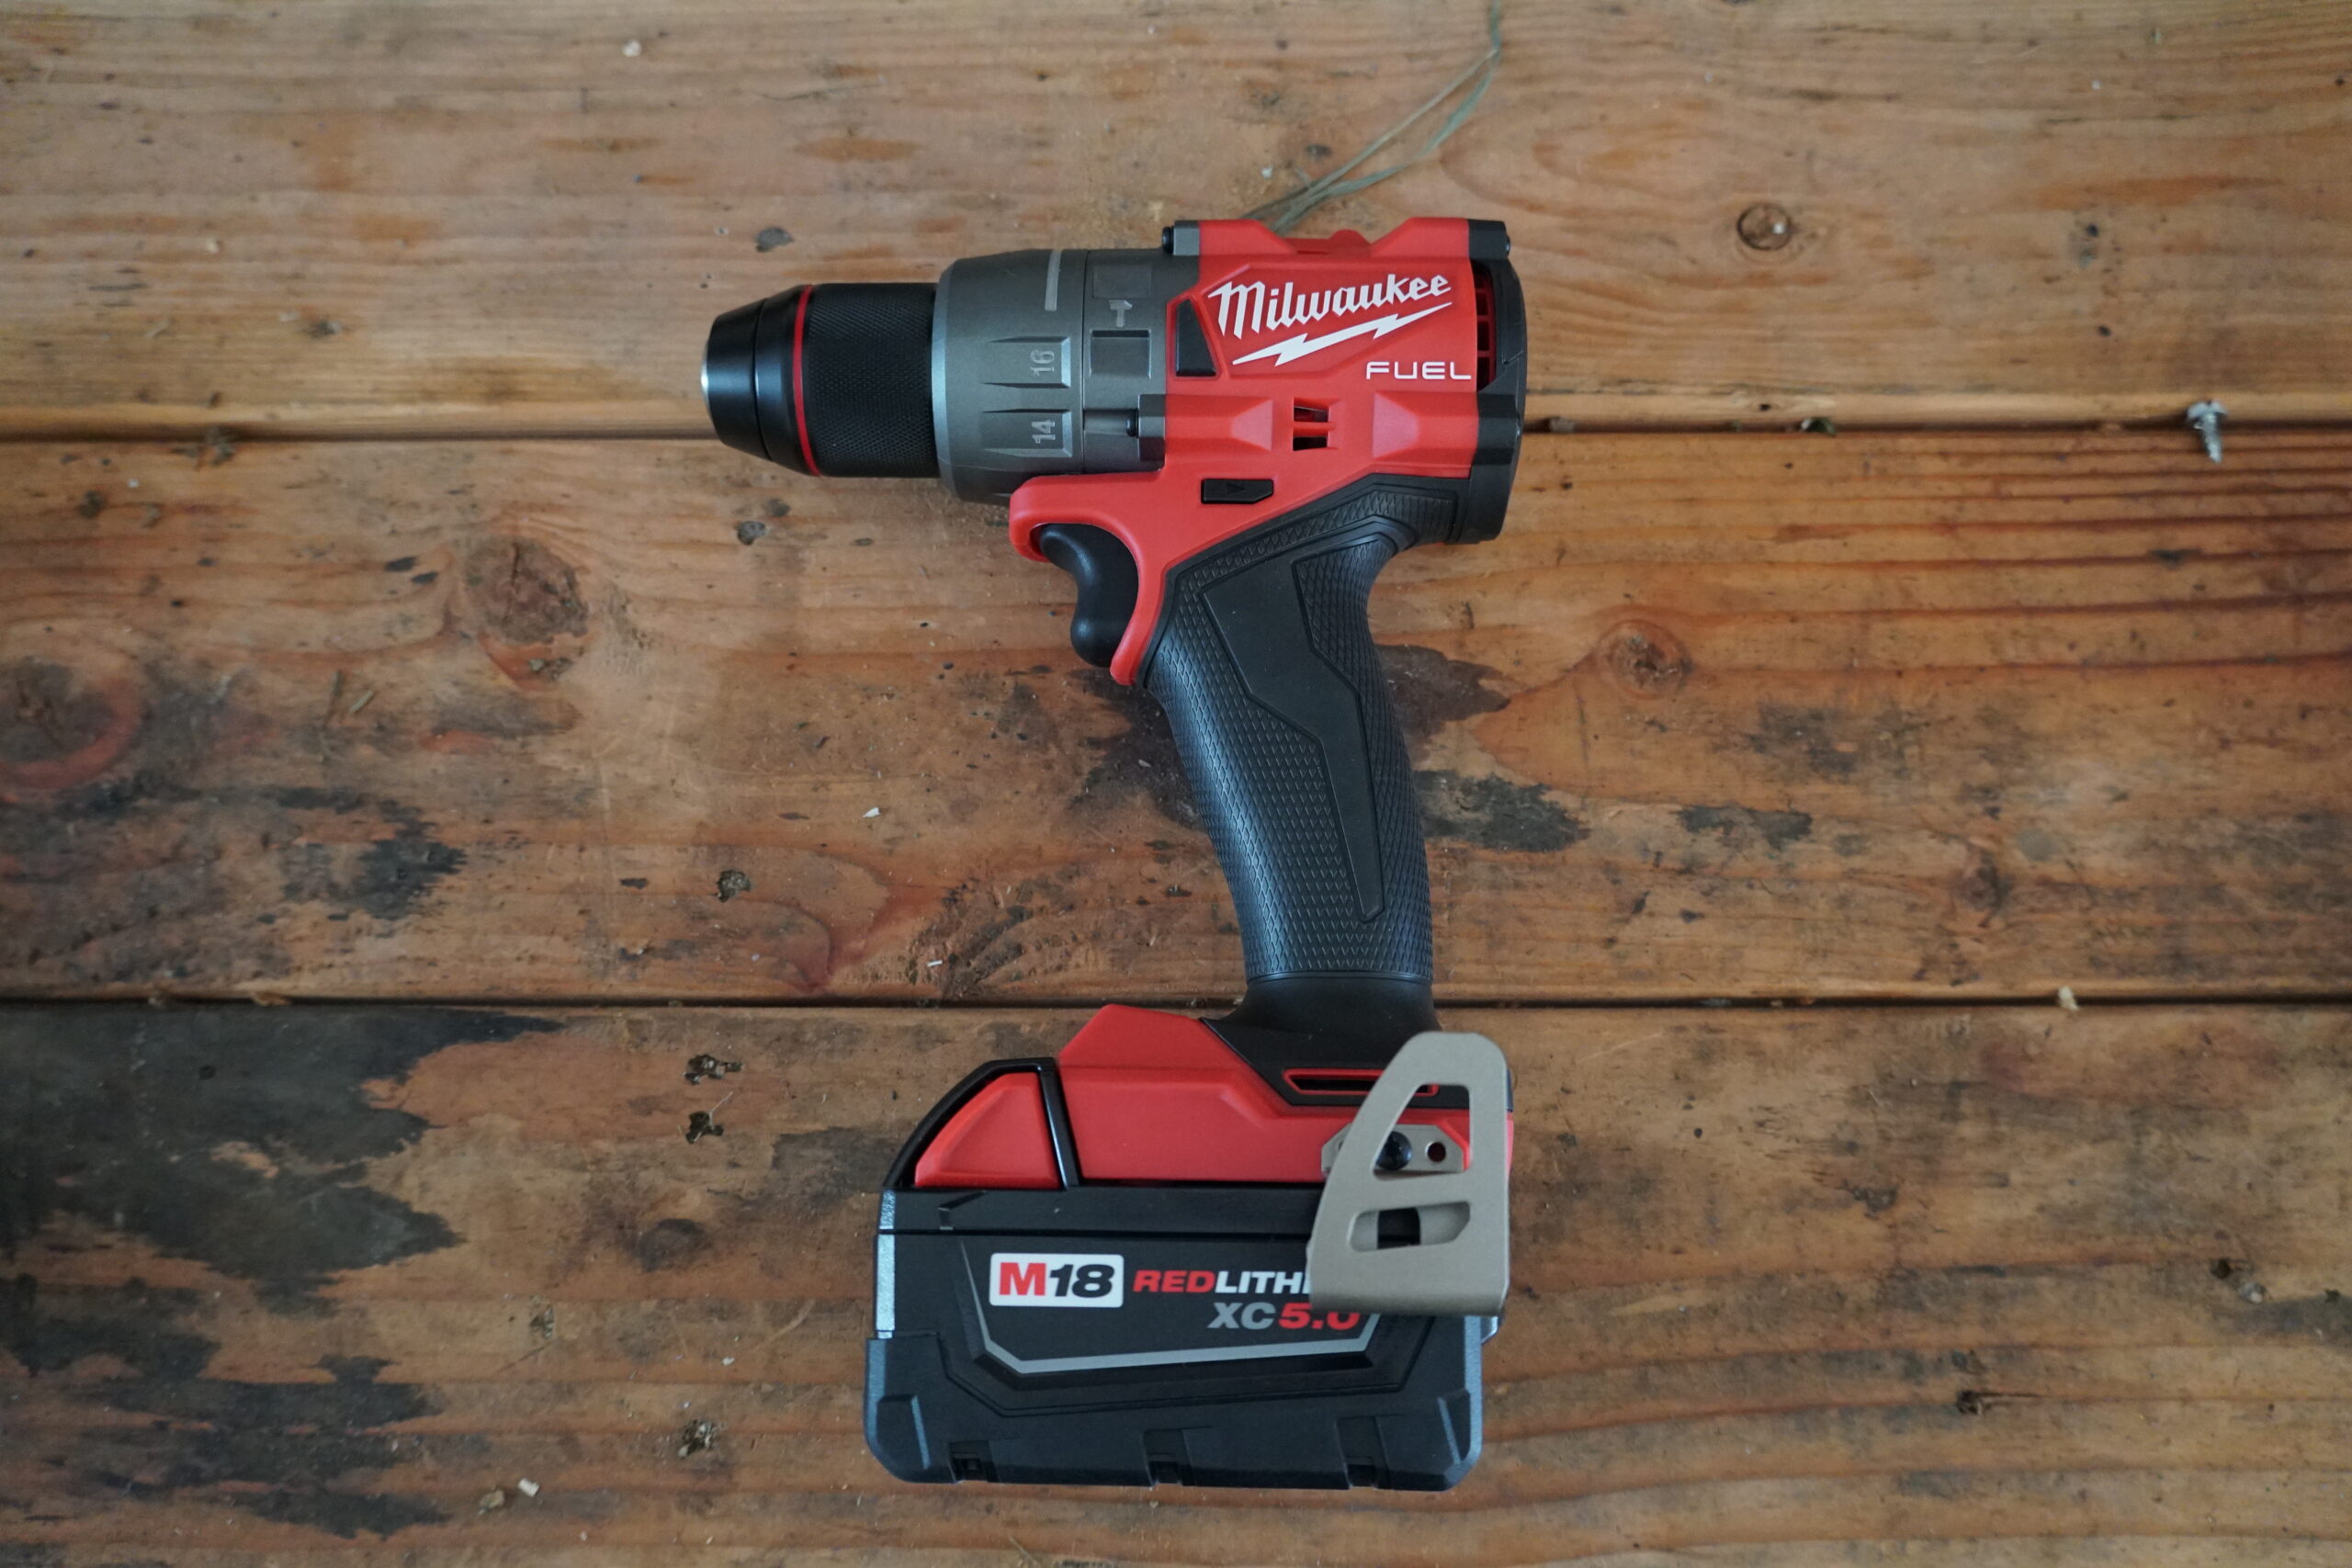 The Best Cordless Drills, Tested and Reviewed